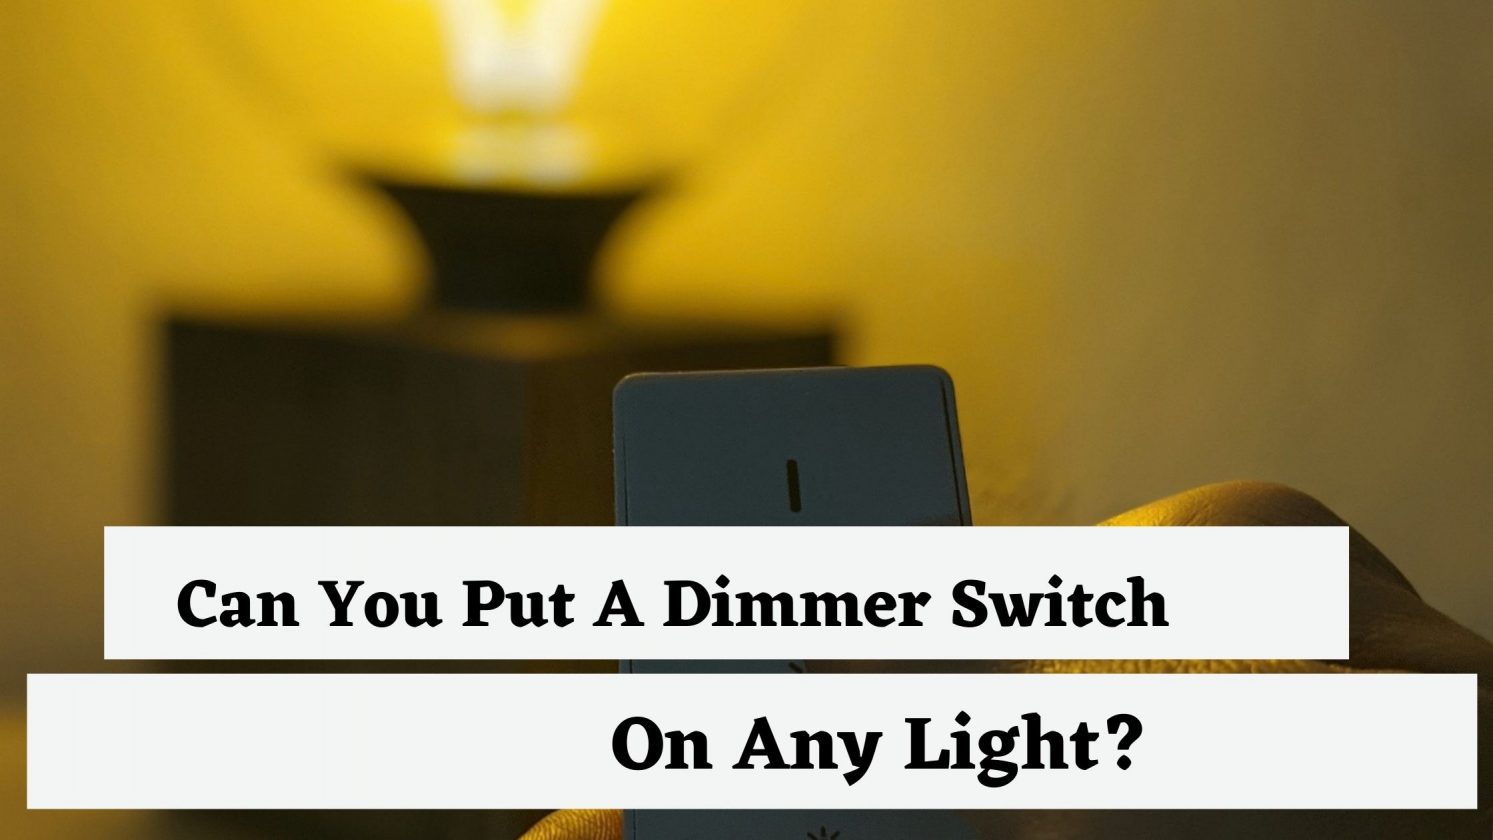 Can You Put A Dimmer Switch On Any Light?